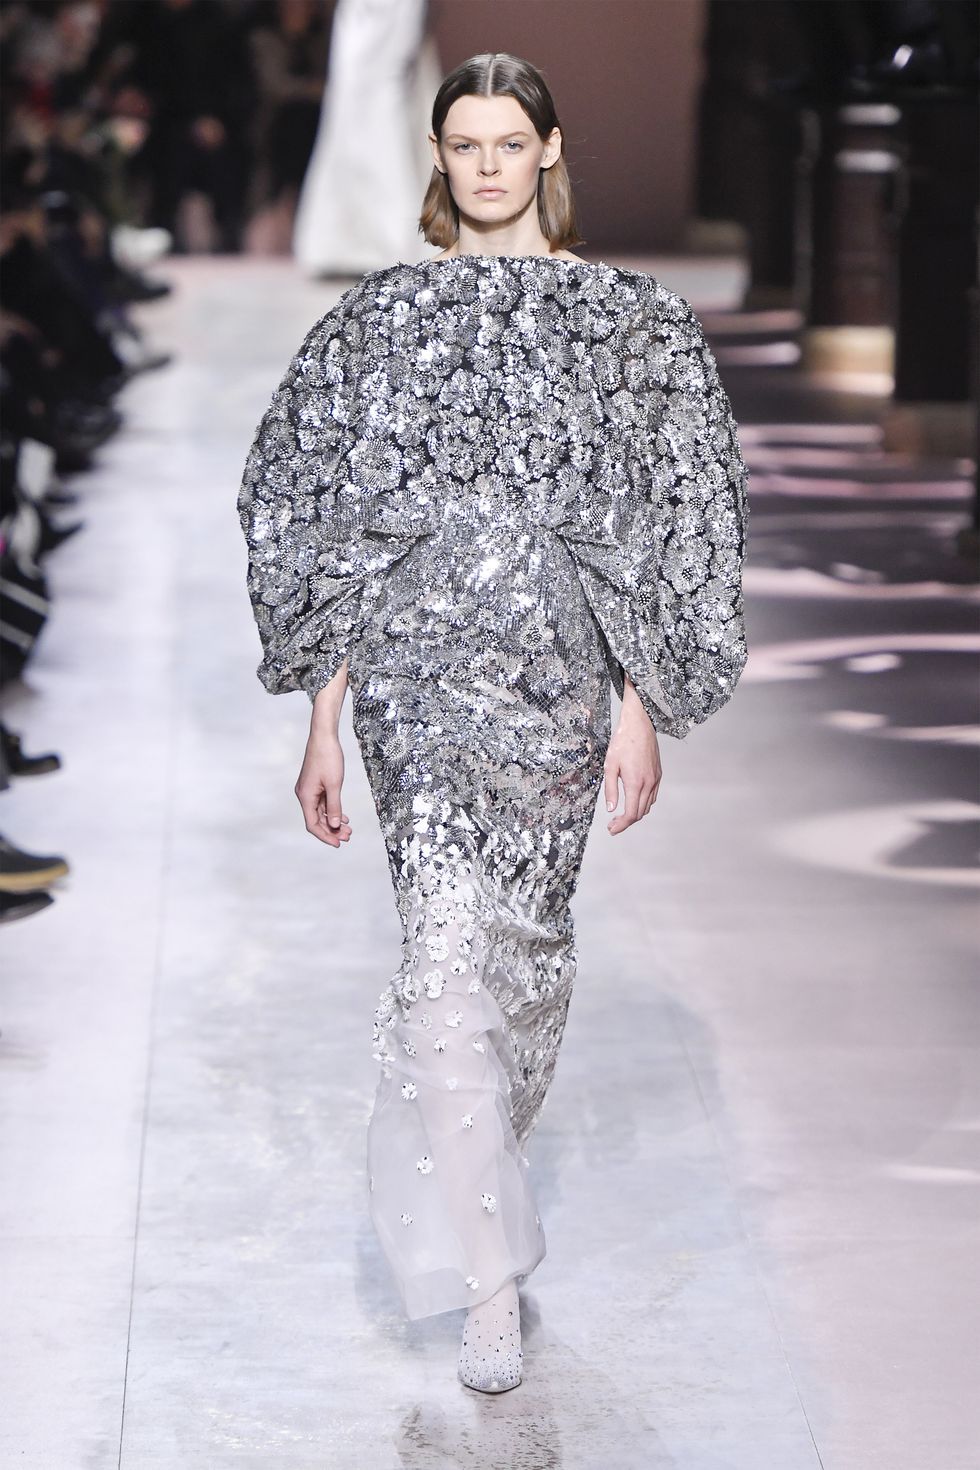 Haute Couture Spring 2020 - Best Looks of Haute Couture Spring 2020